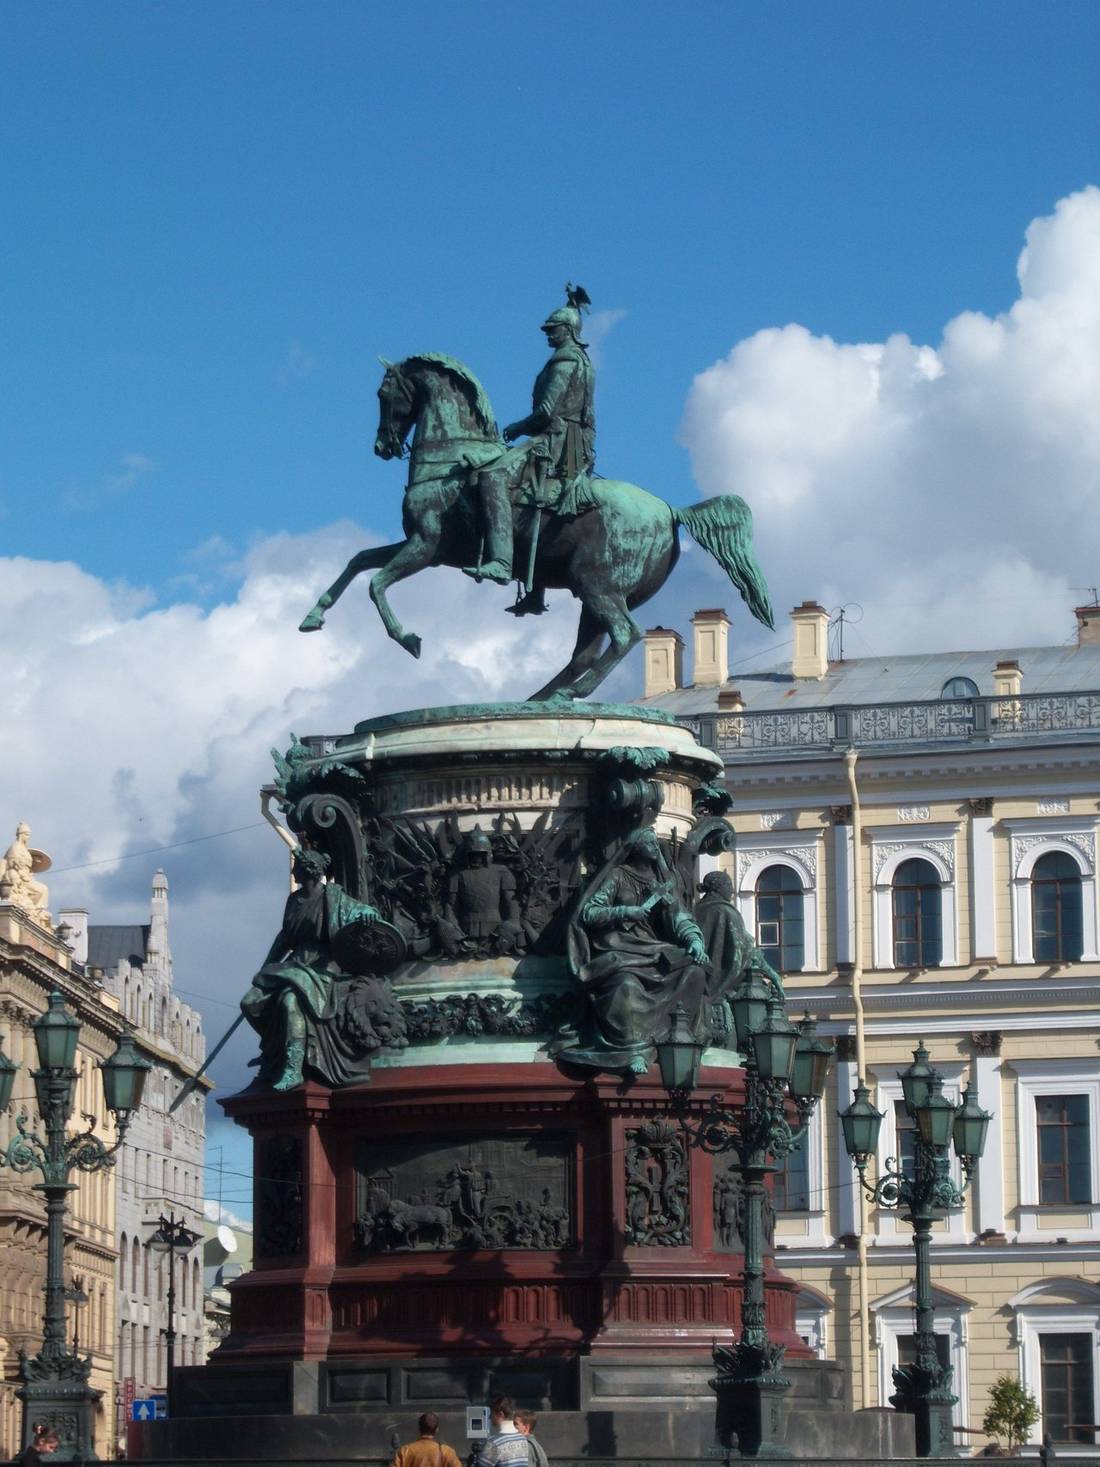 Monument to the Russian Emperor Nicholas I